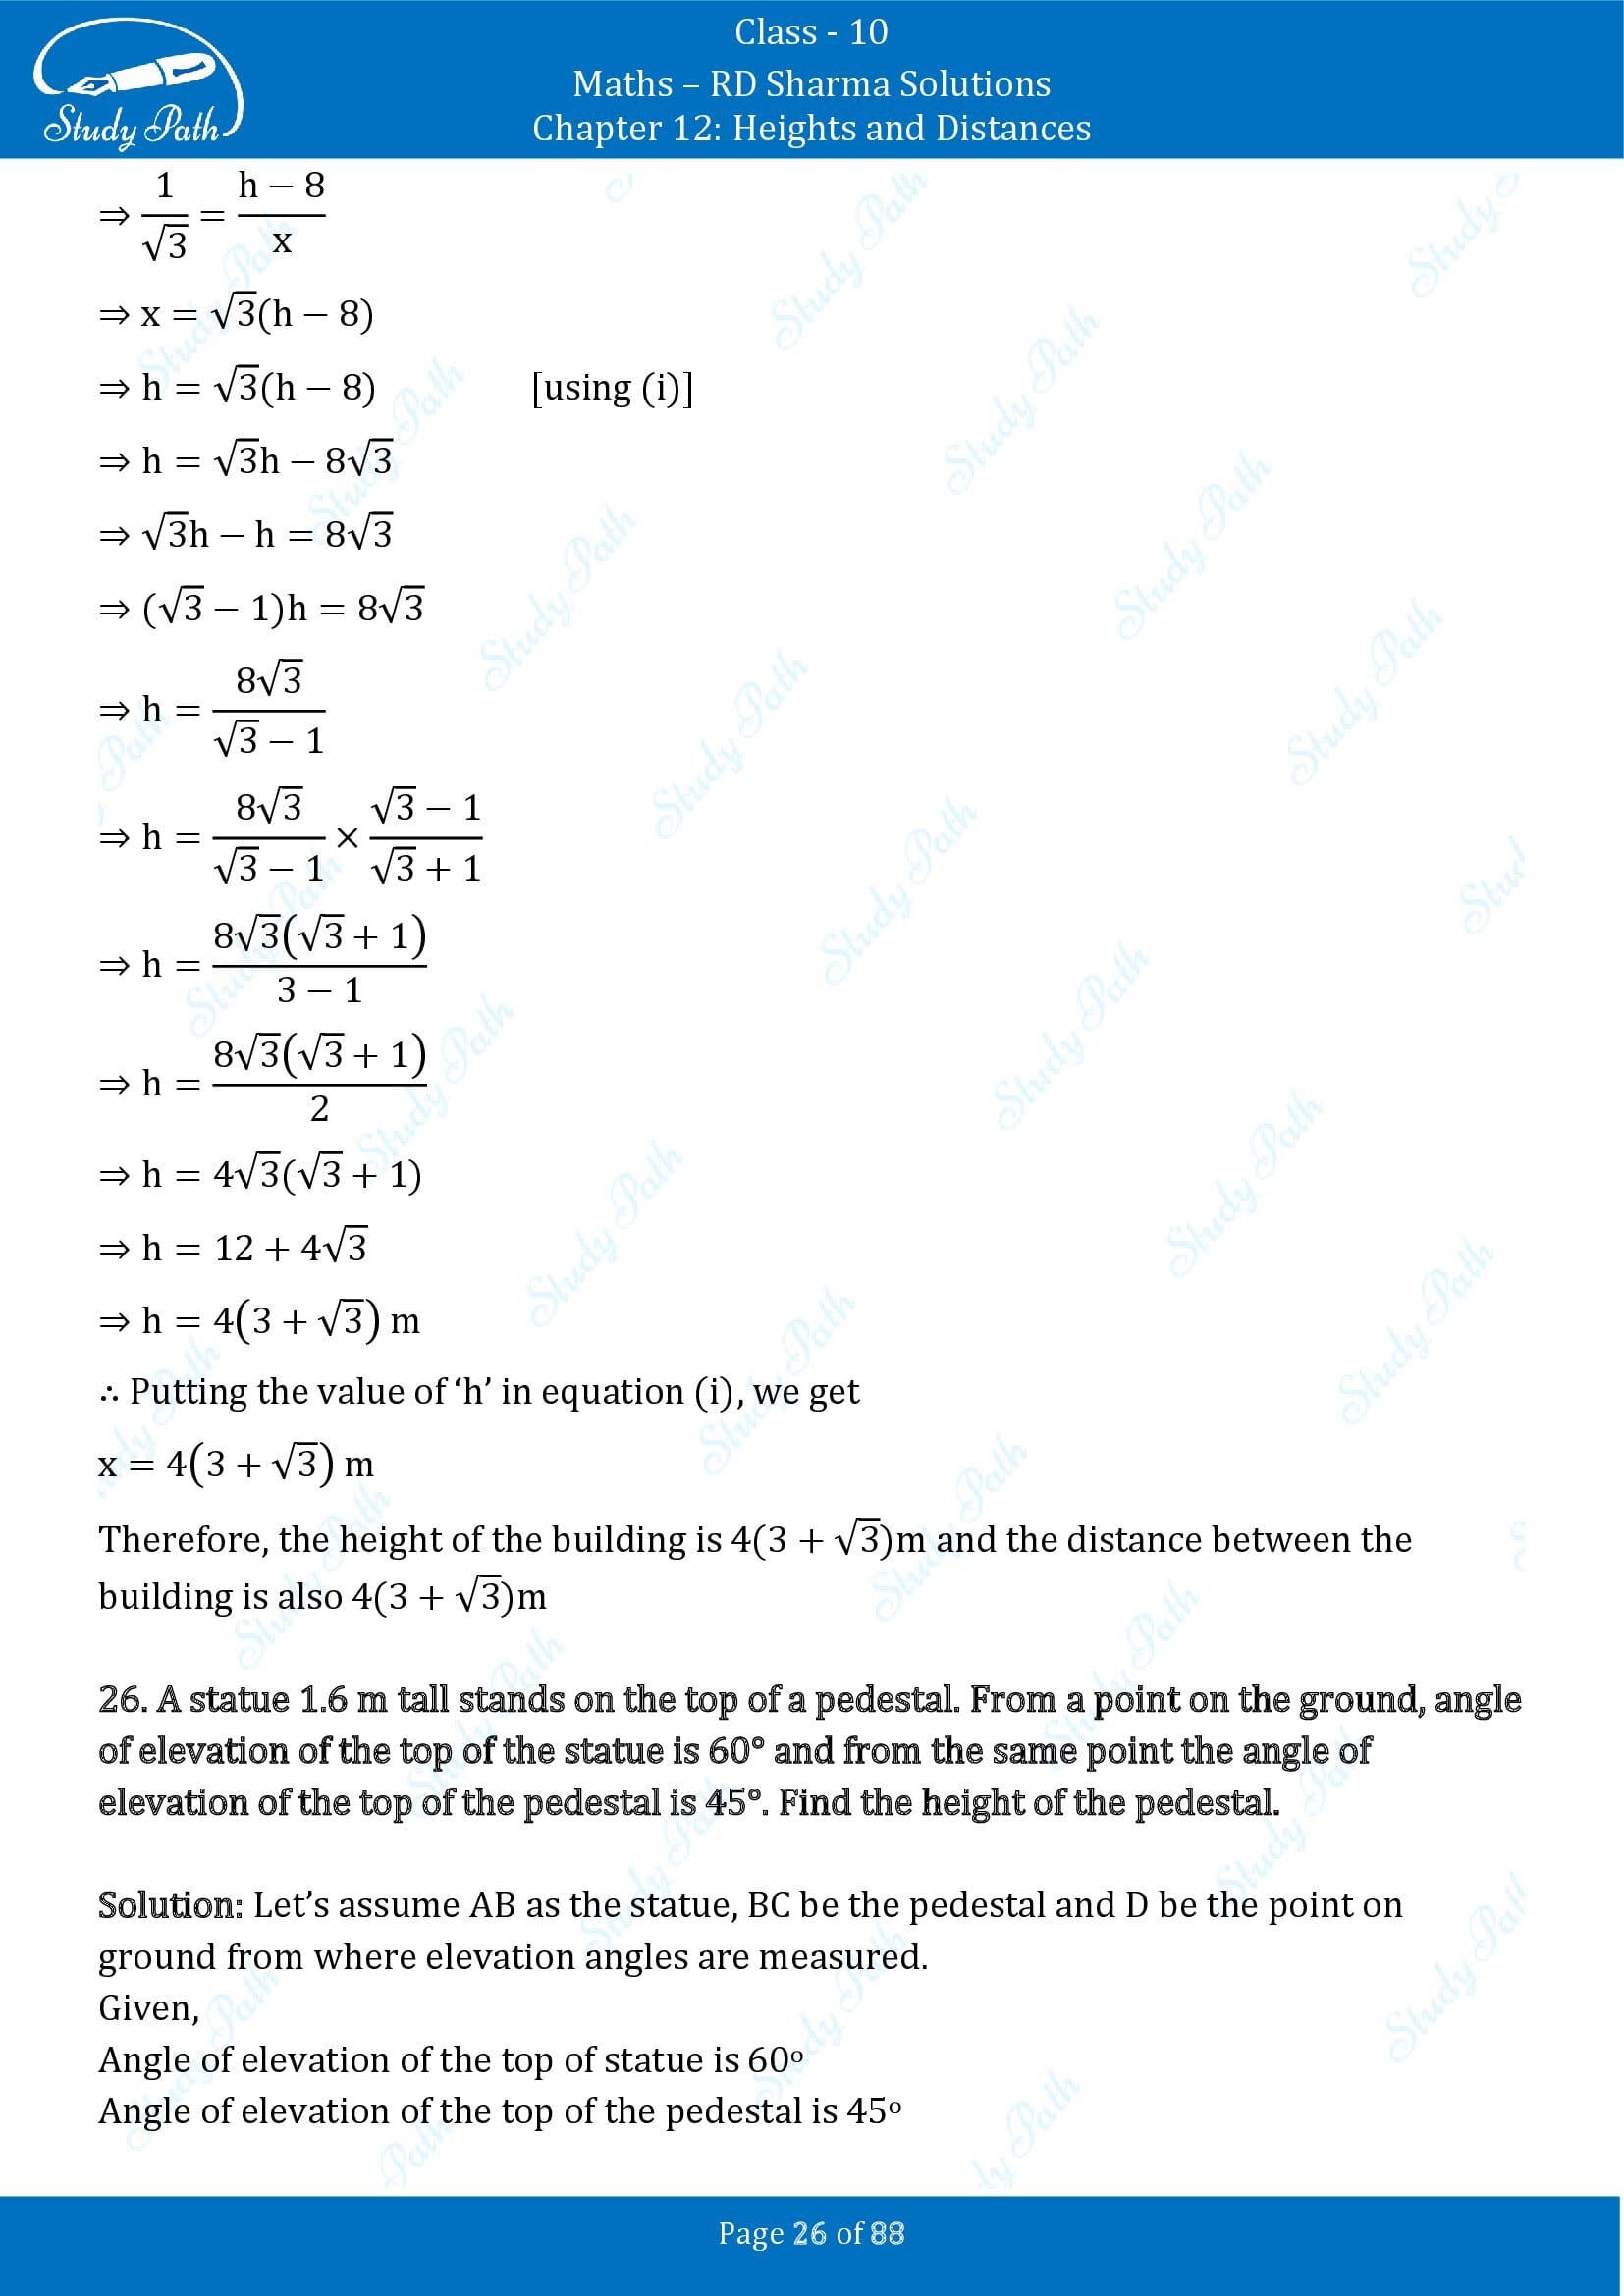 RD Sharma Solutions Class 10 Chapter 12 Heights and Distances Exercise 12.1 00026